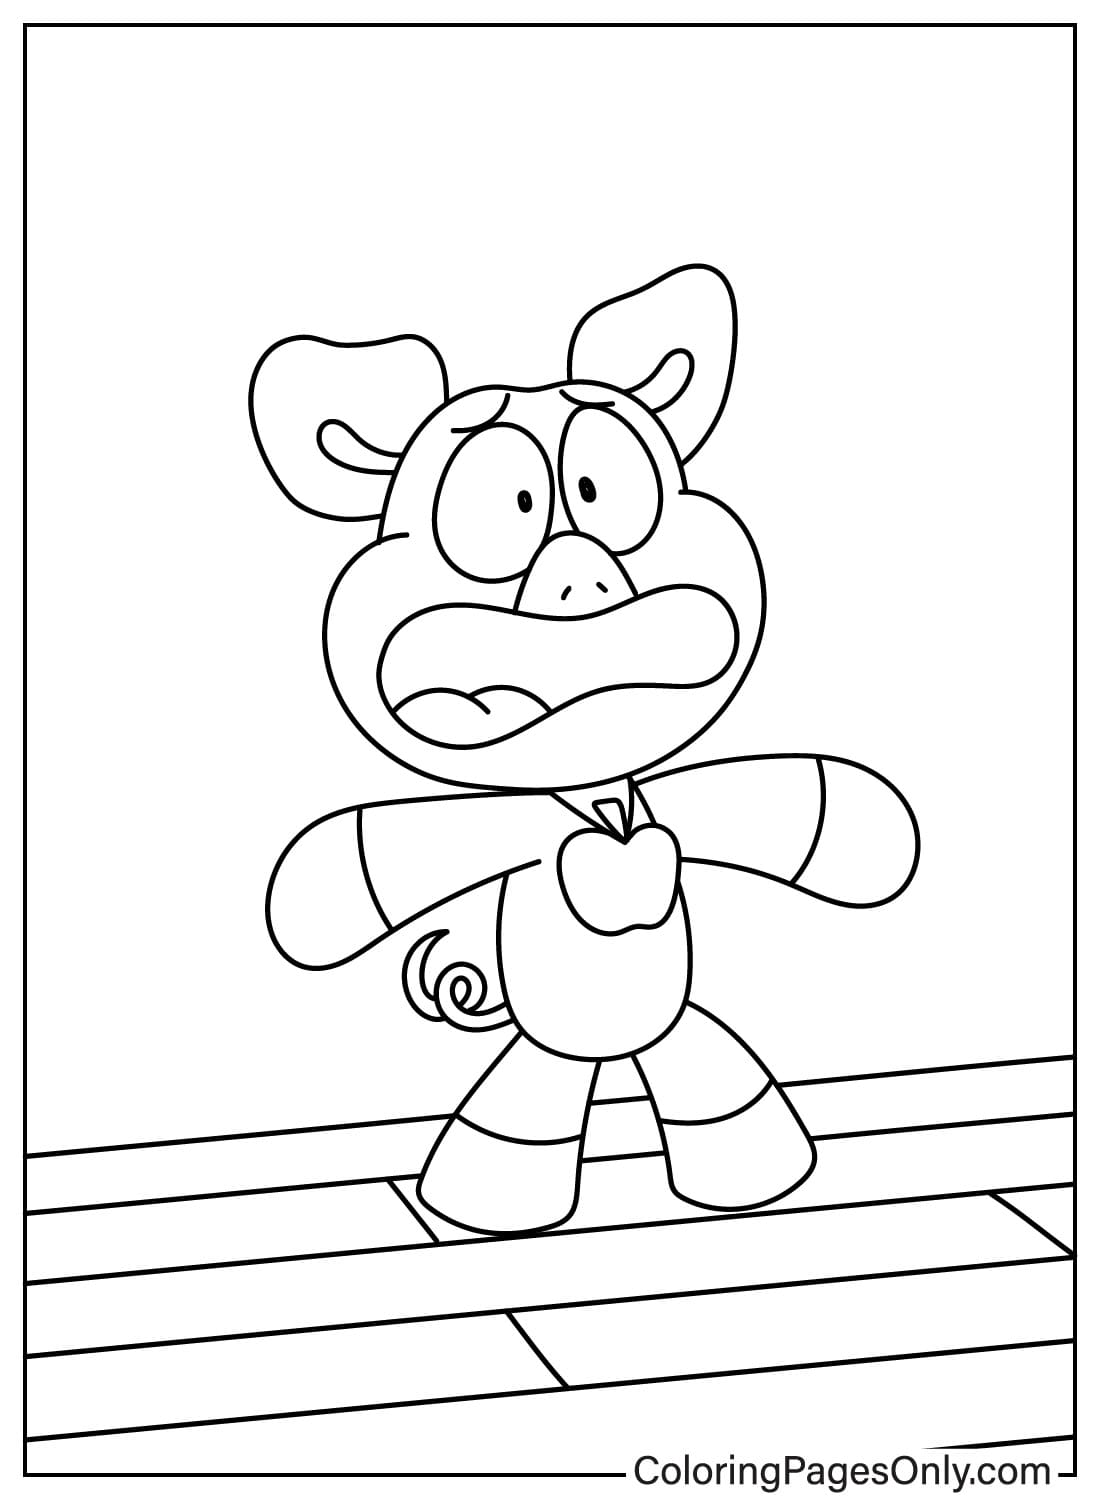 Scary PickyPiggy Coloring Page from PickyPiggy